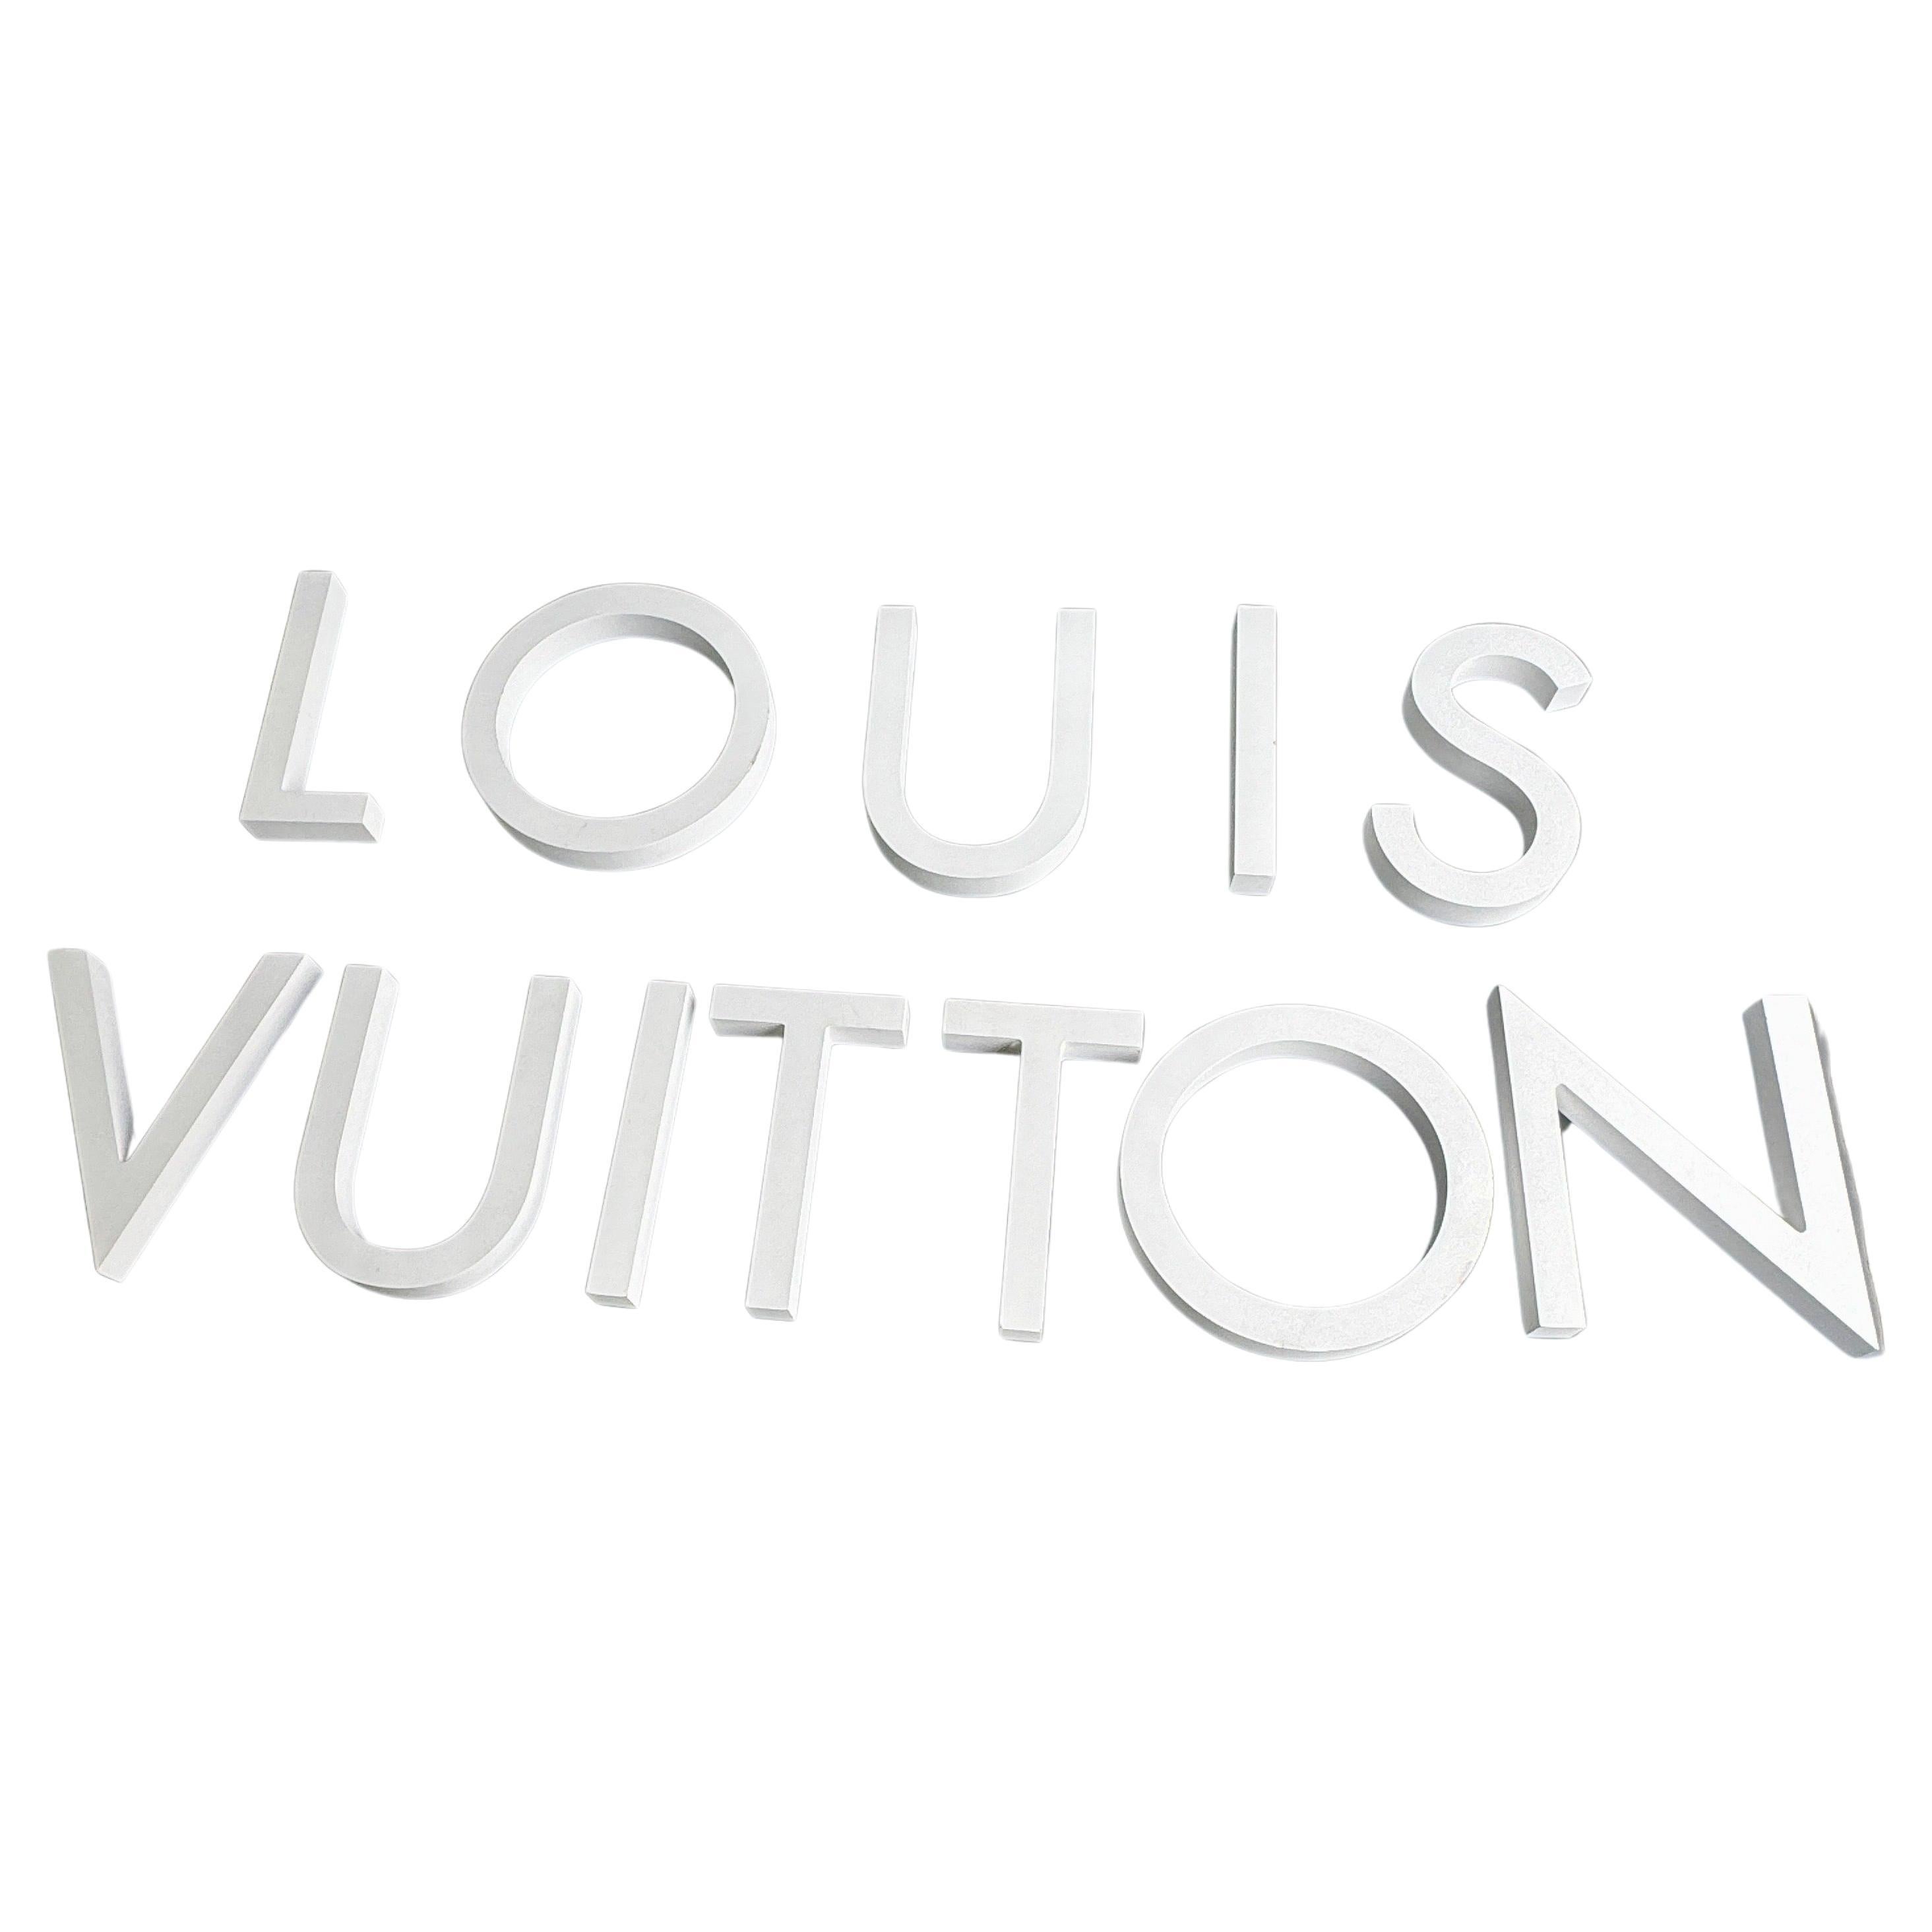 Large French Louis Vuitton Letters Designer Store Display